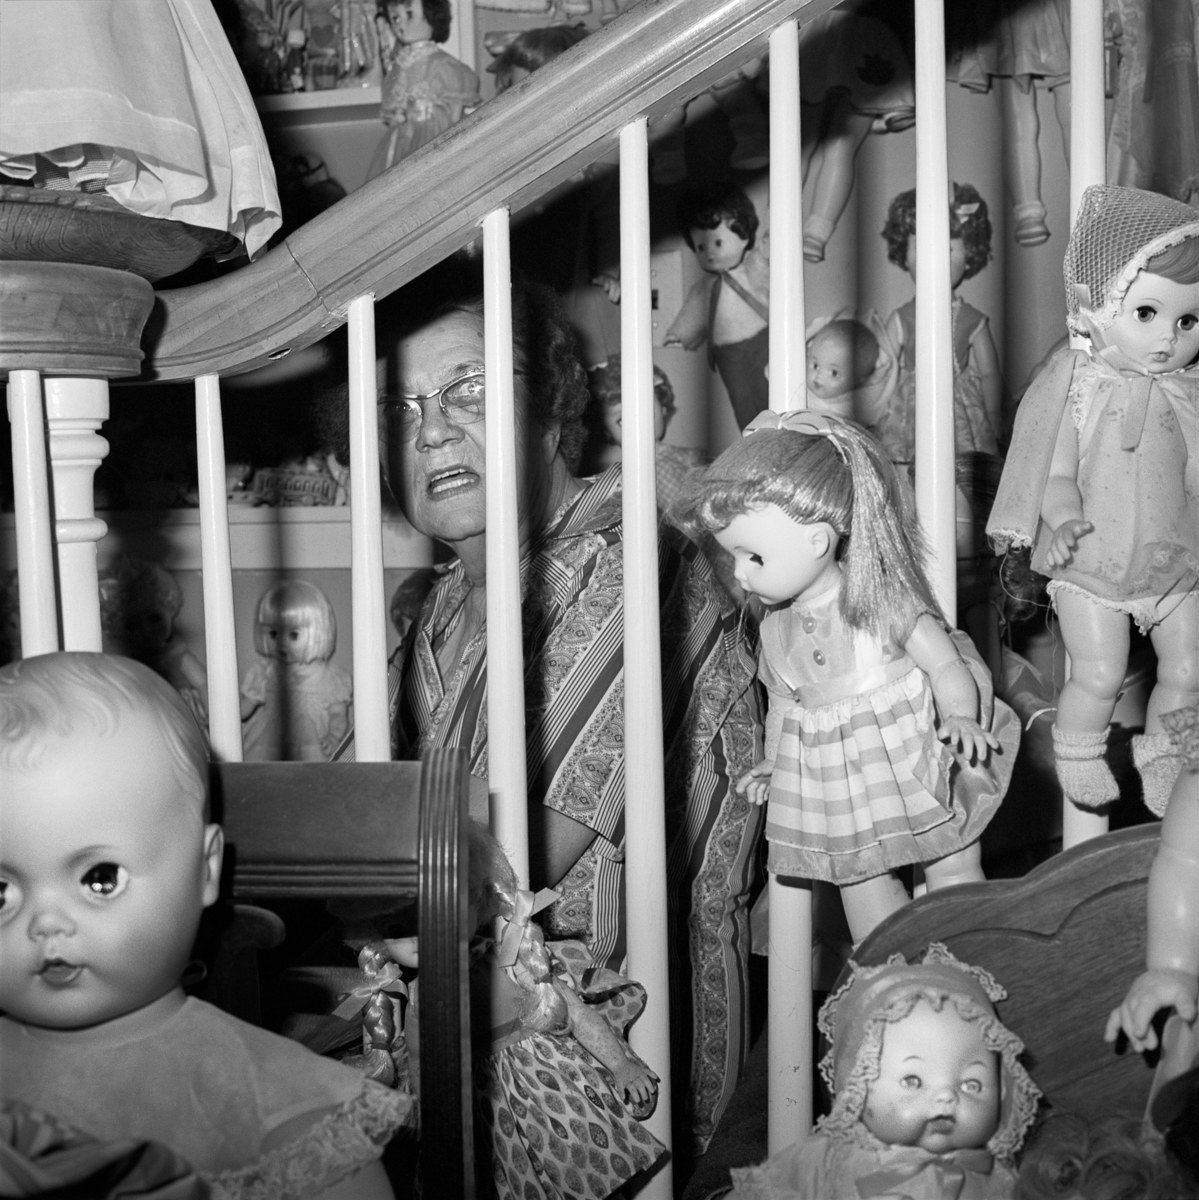 An older woman wearing glasses sits on the stairs behind a railing, surrounded by dolls